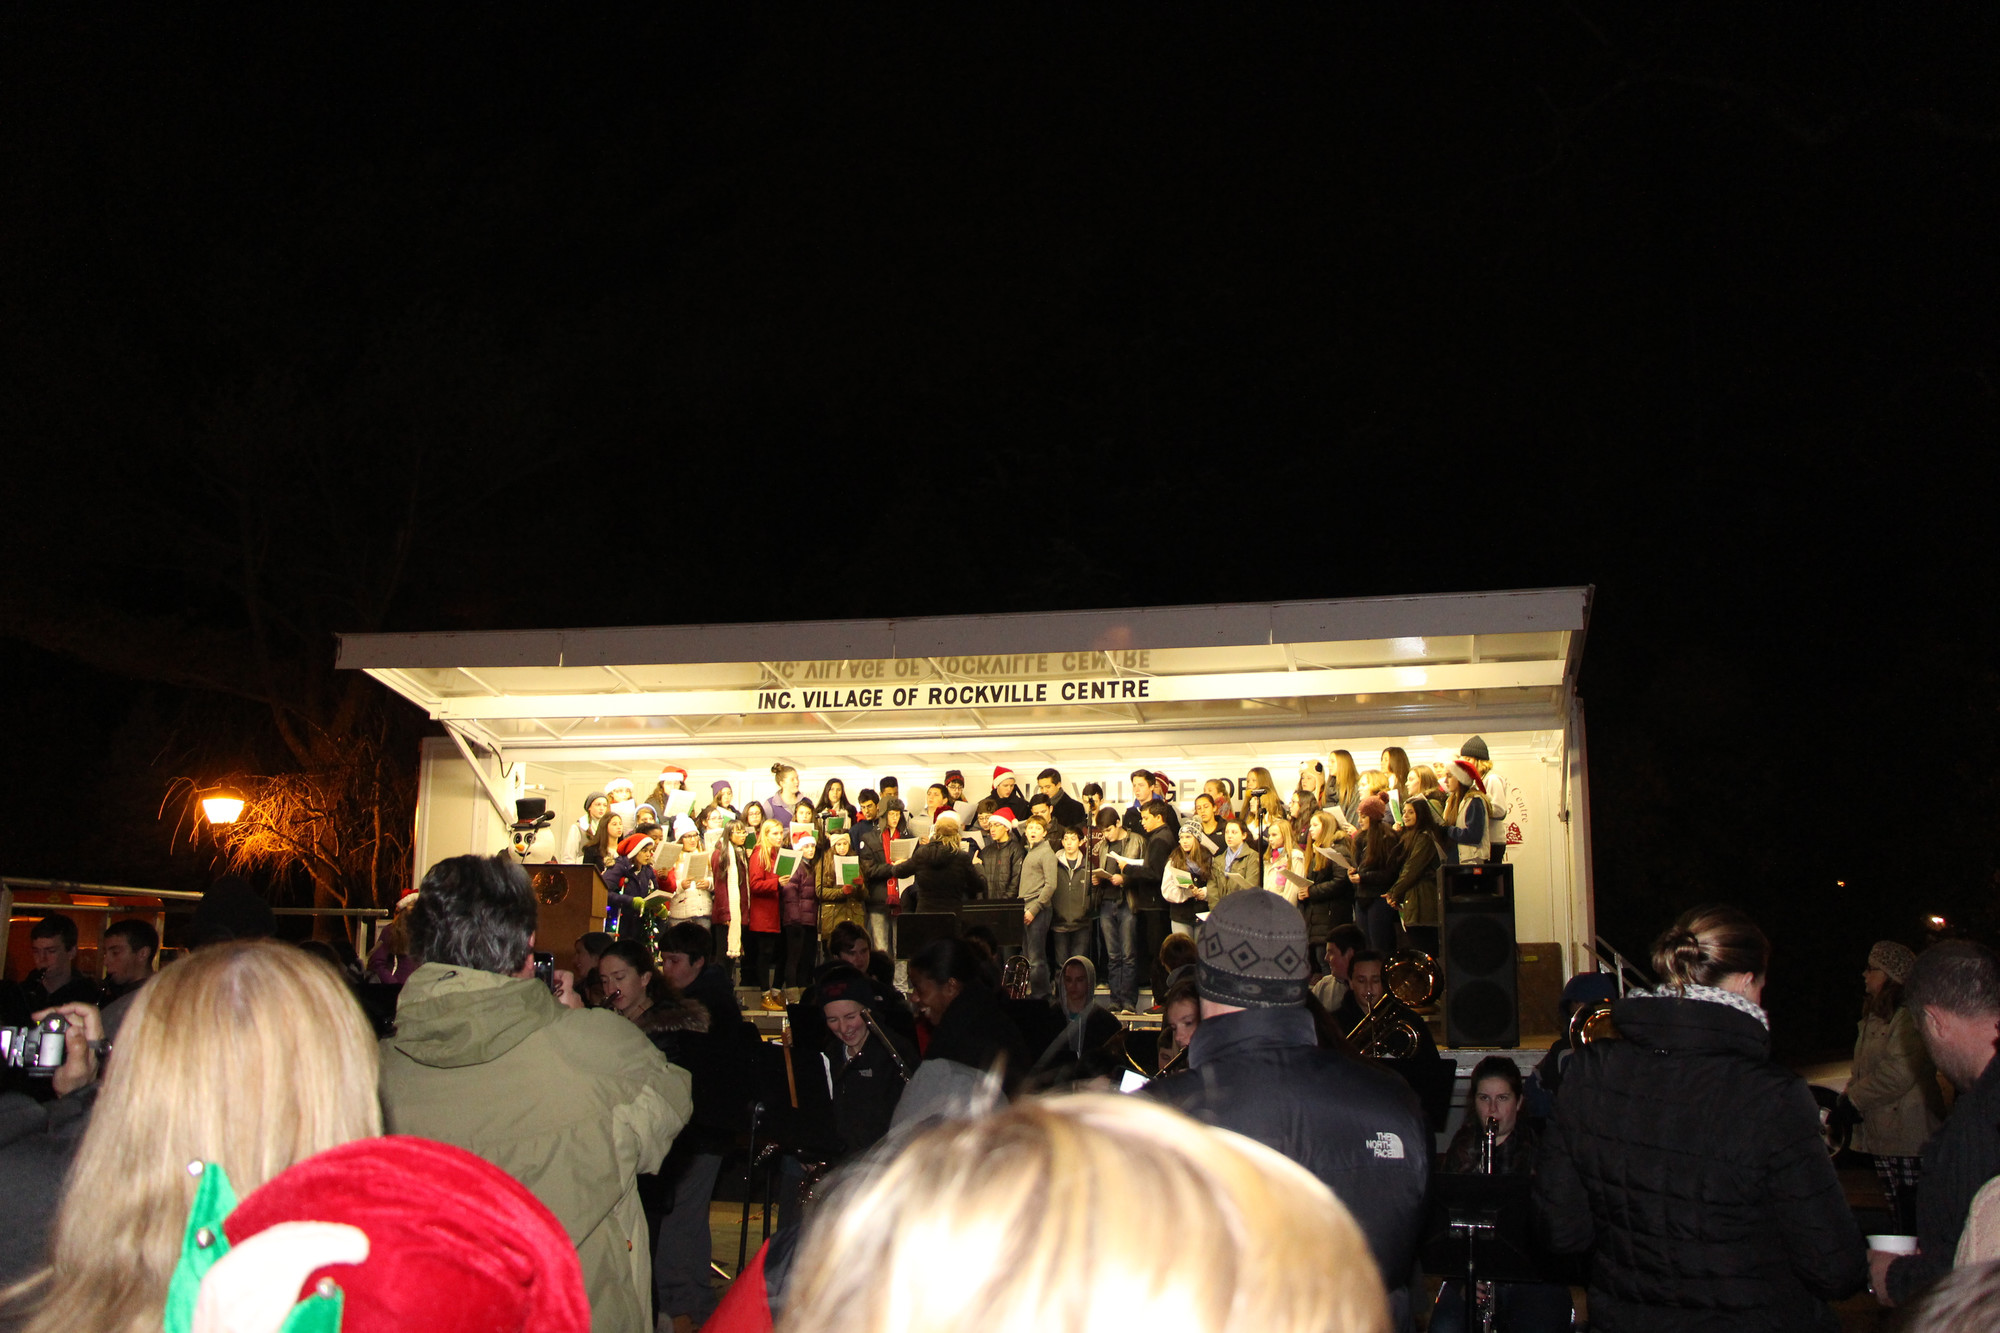 Many people from the Rockville Centre Community came out to hear and watch the South Side Band and Choir sign holiday songs at the Dec. 4 tree lighting.